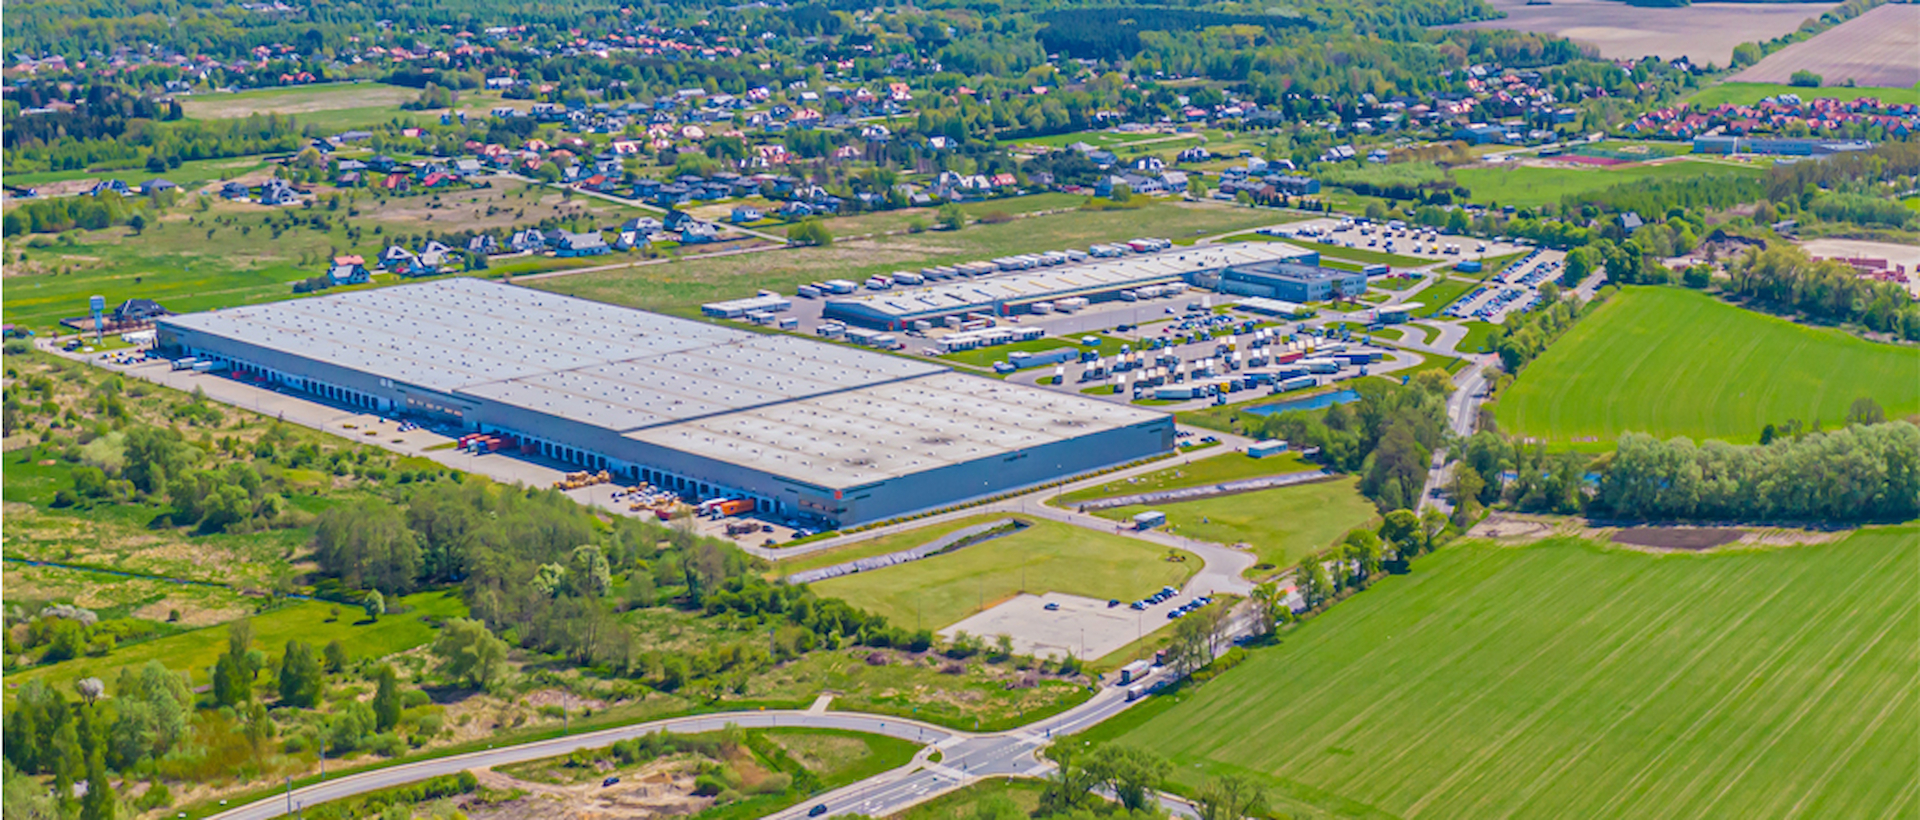 PS Business Parks Meets Market Demand With Fine-Tuned Operations